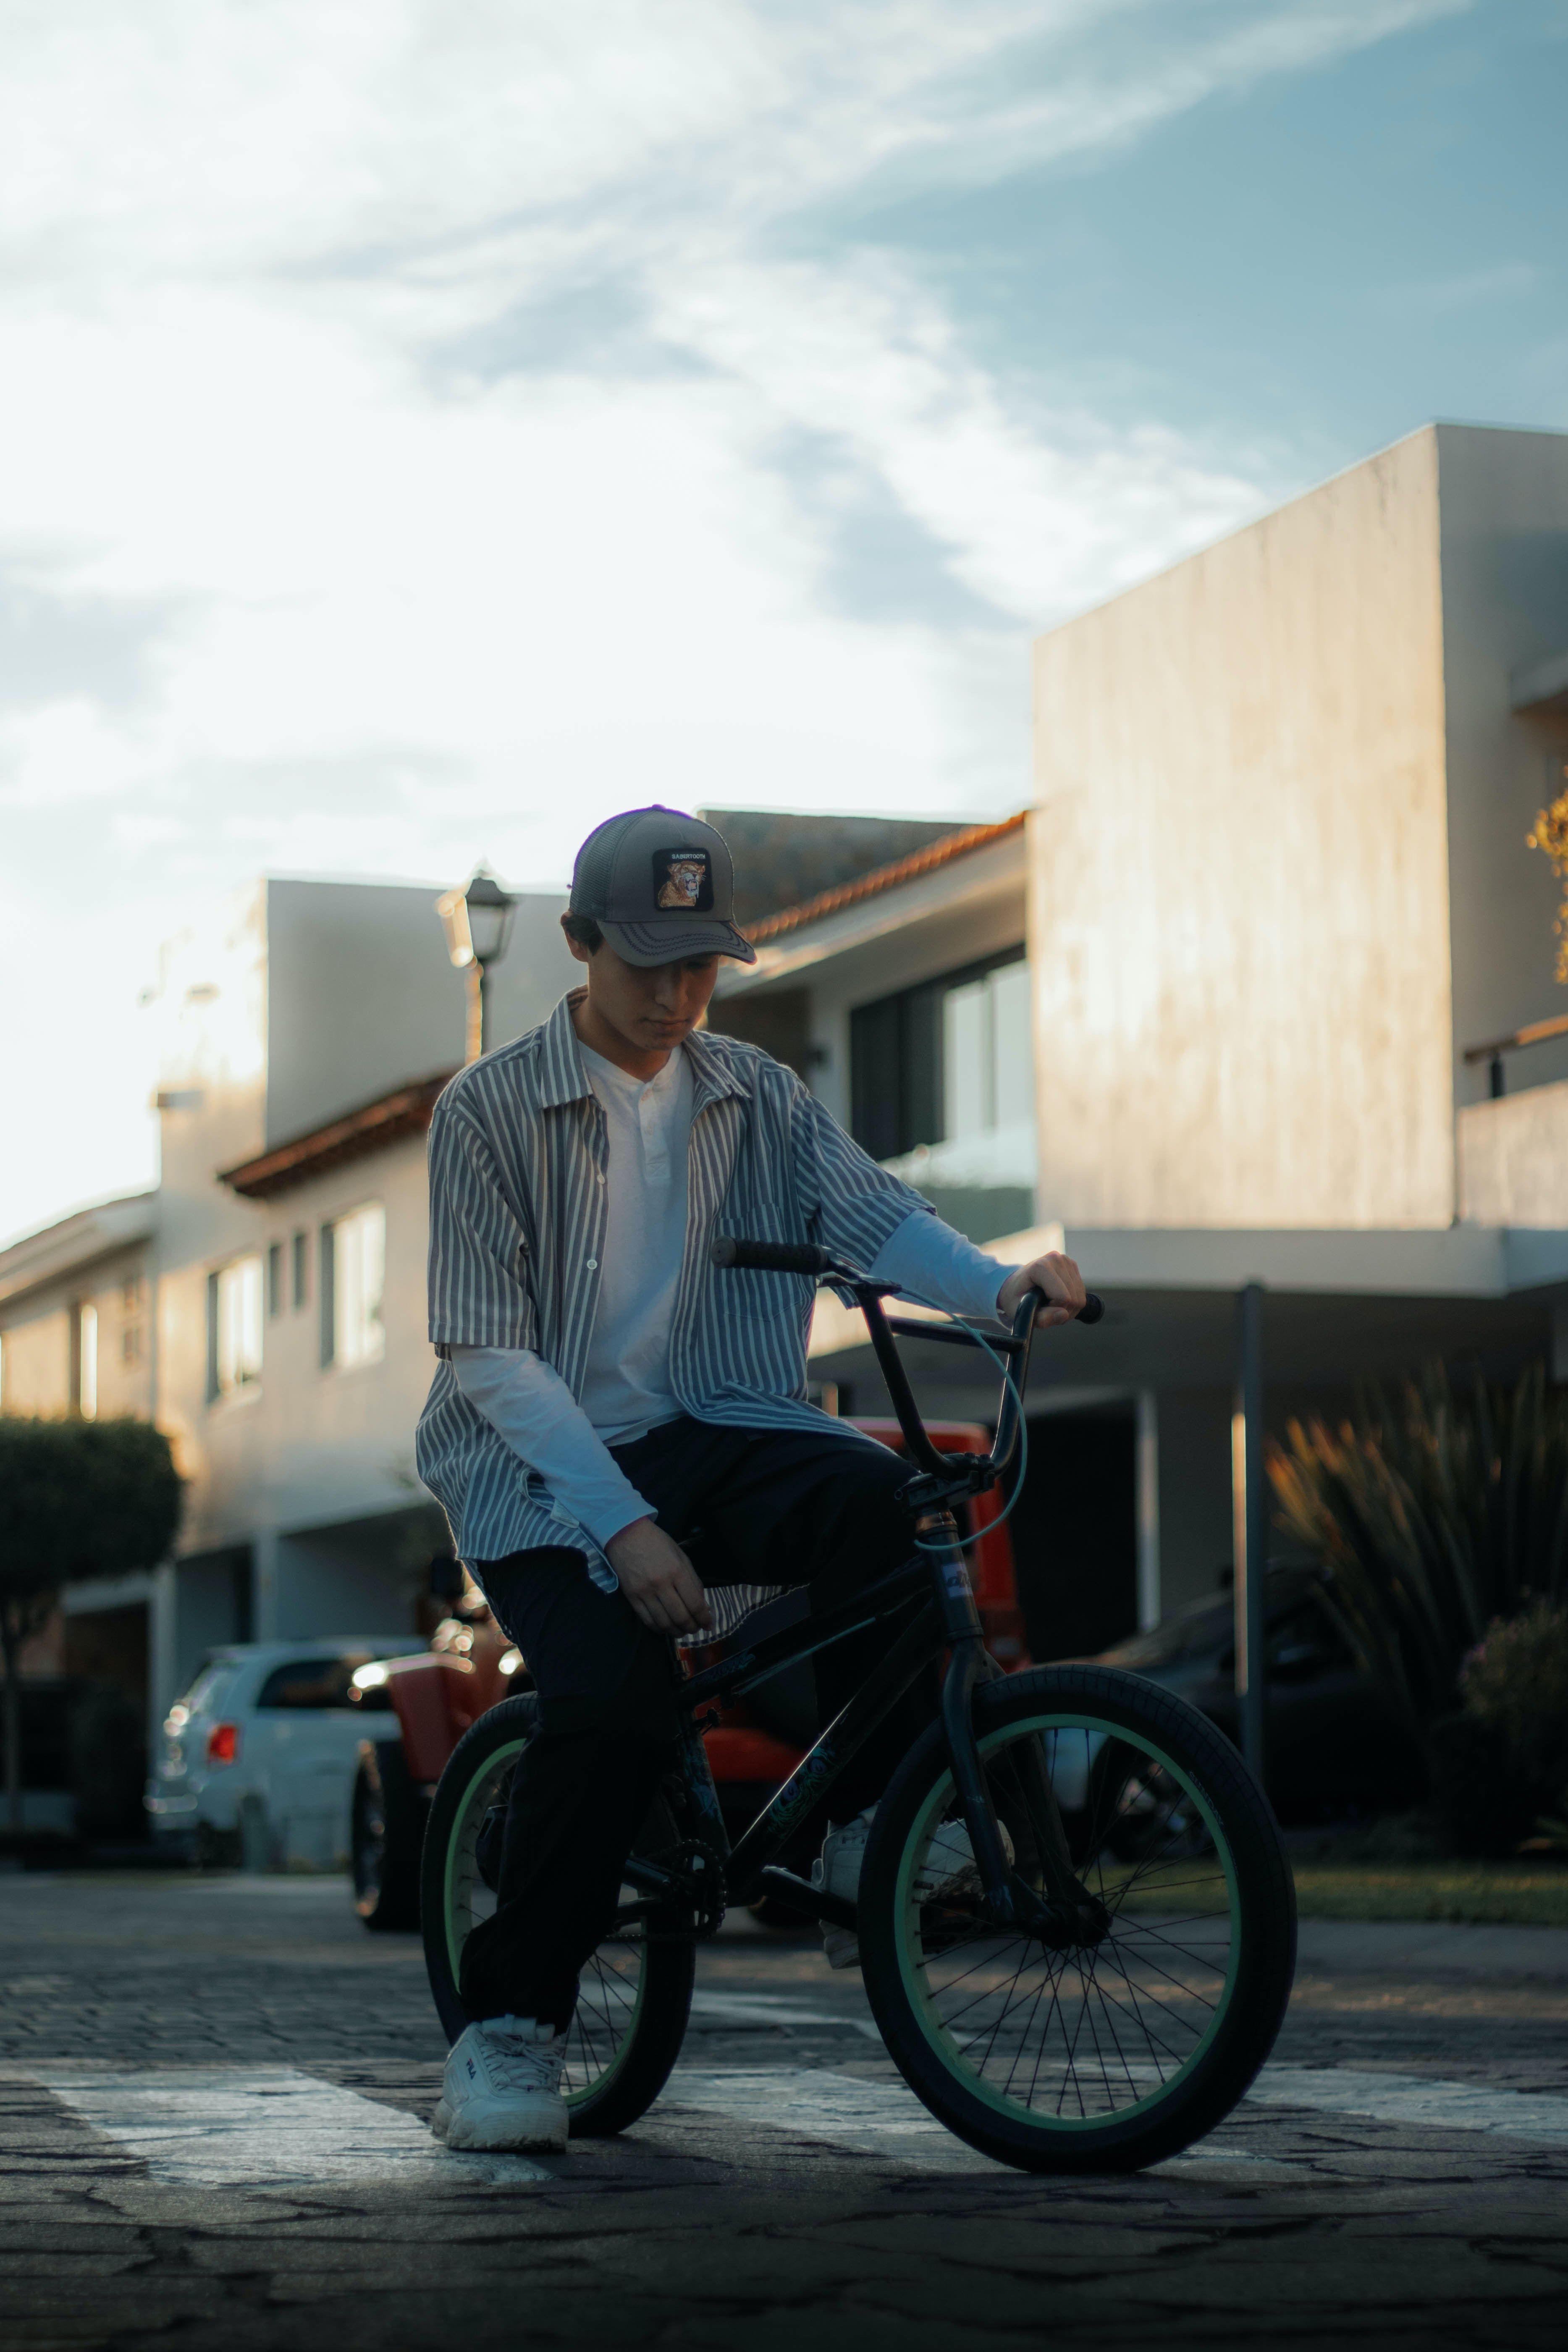 Michael biked to his grandfather's house to celebrate his birthday there instead. | Source: Pexels